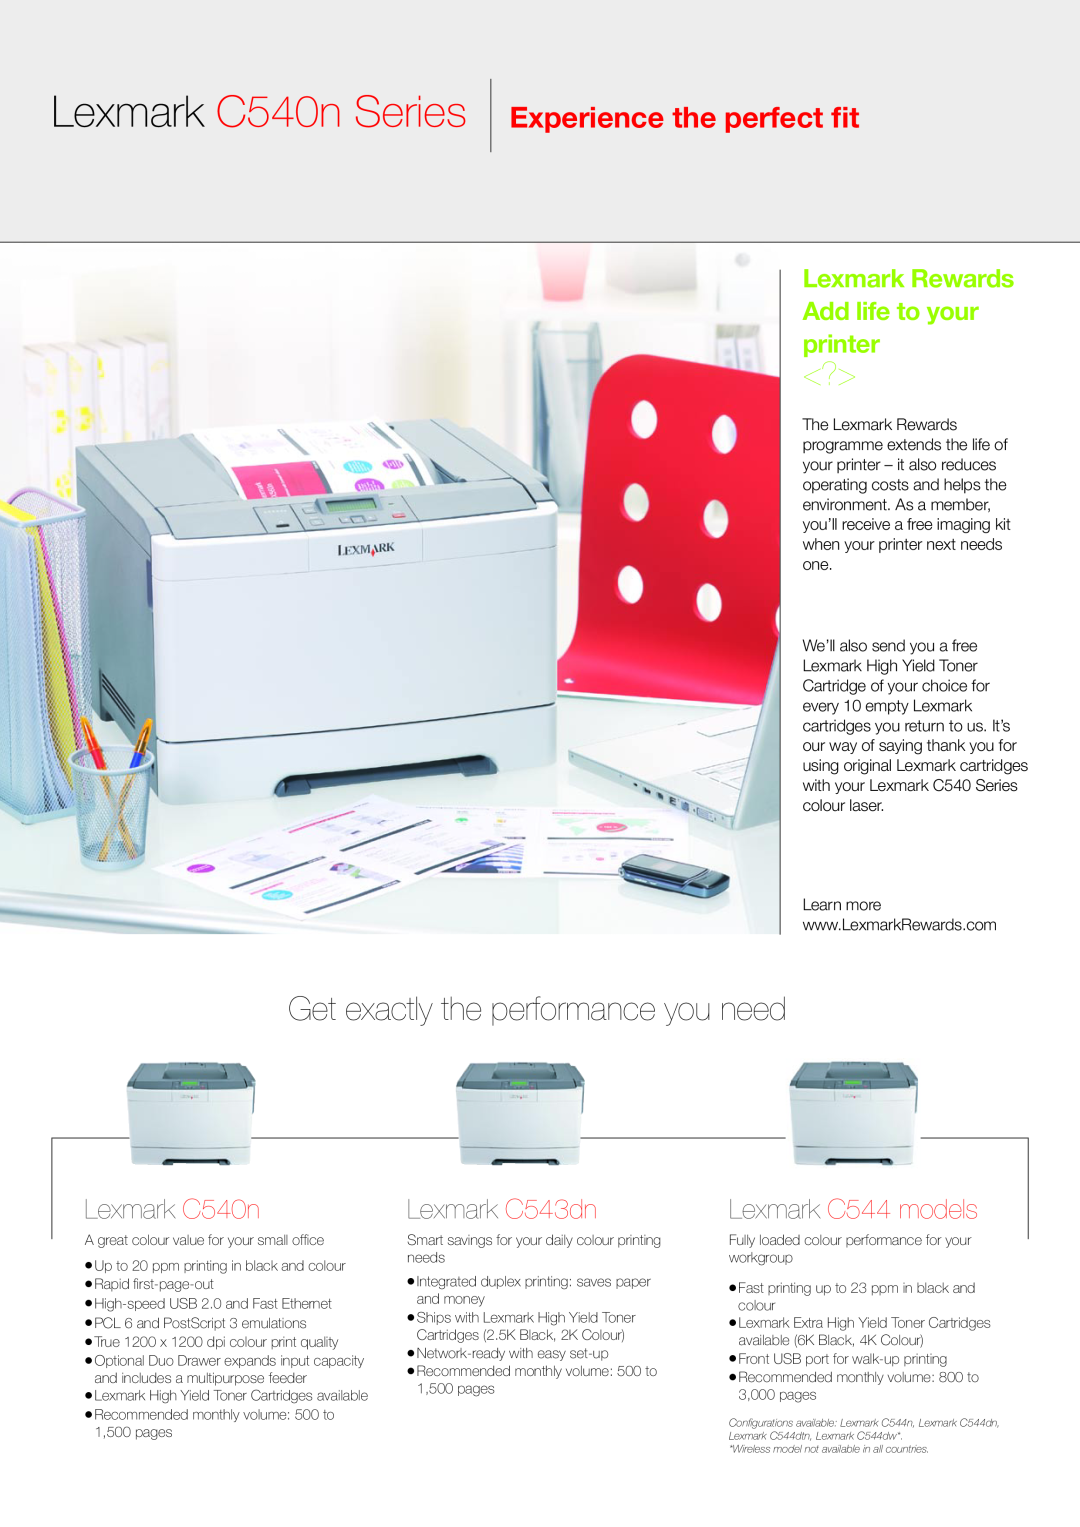 Lexmark manual Get exactly the performance you need, Lexmark C540n Series, Experience the perfect fit, Lexmark C543dn 